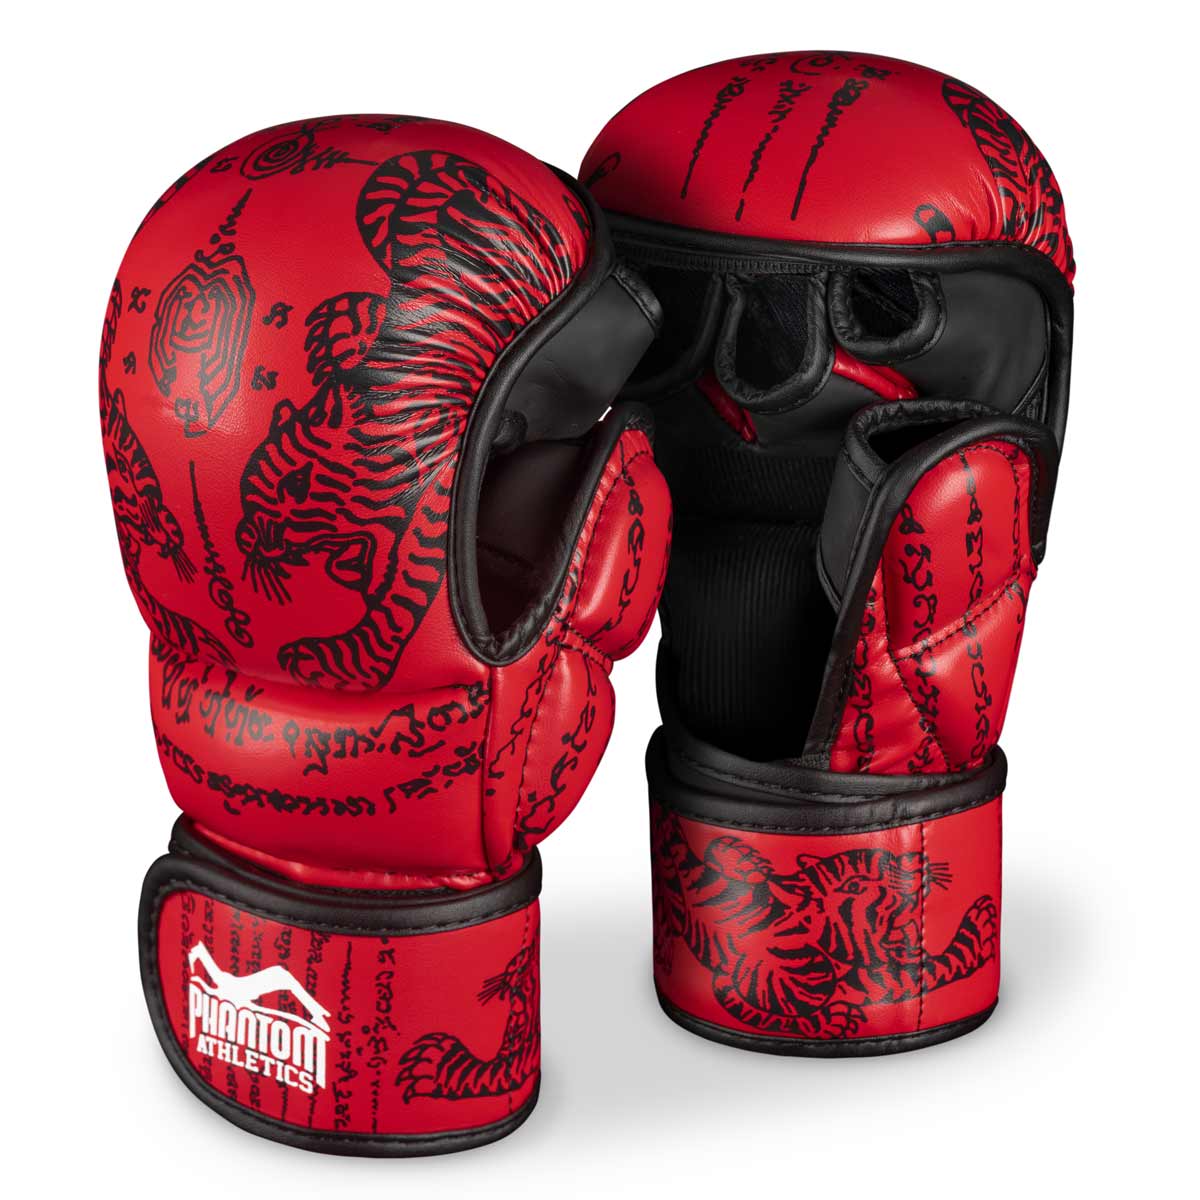 Phantom Muay Thai gloves for Thai boxing and MMA sparring, competition and training. In the traditional Sak Yant design and the color red.